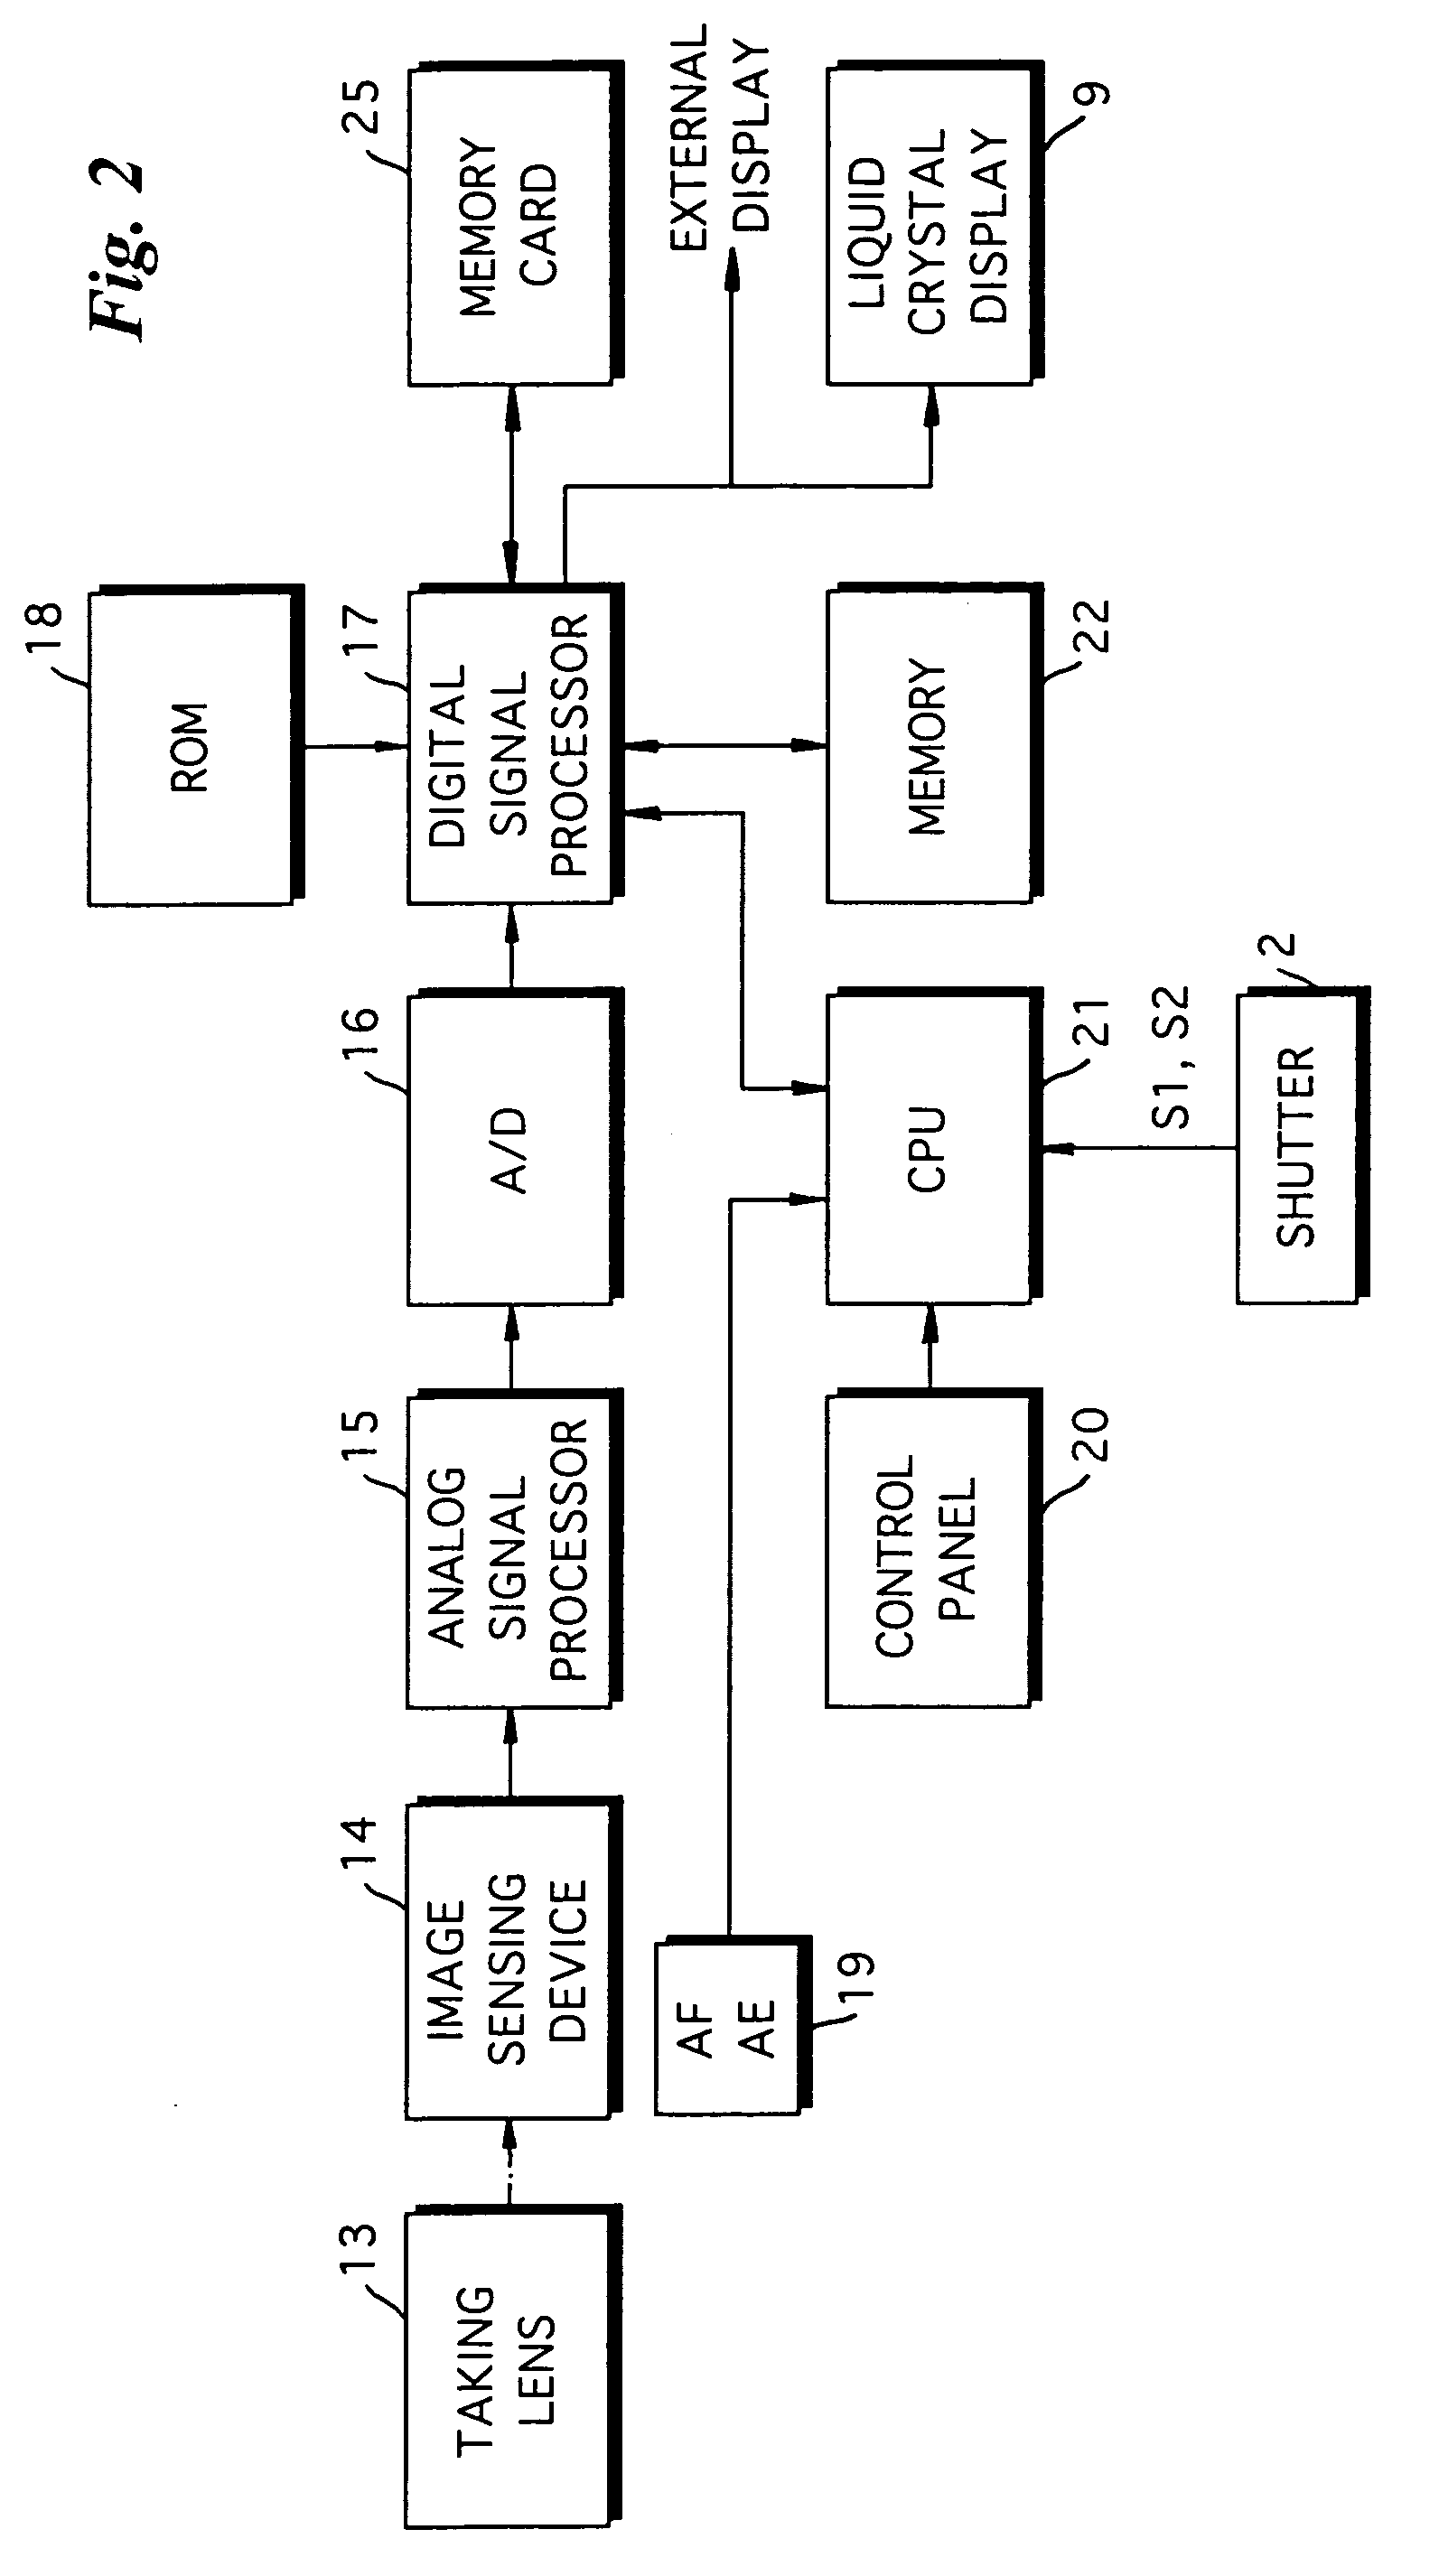 Digital still camera with composition advising function, and method of controlling operation of same